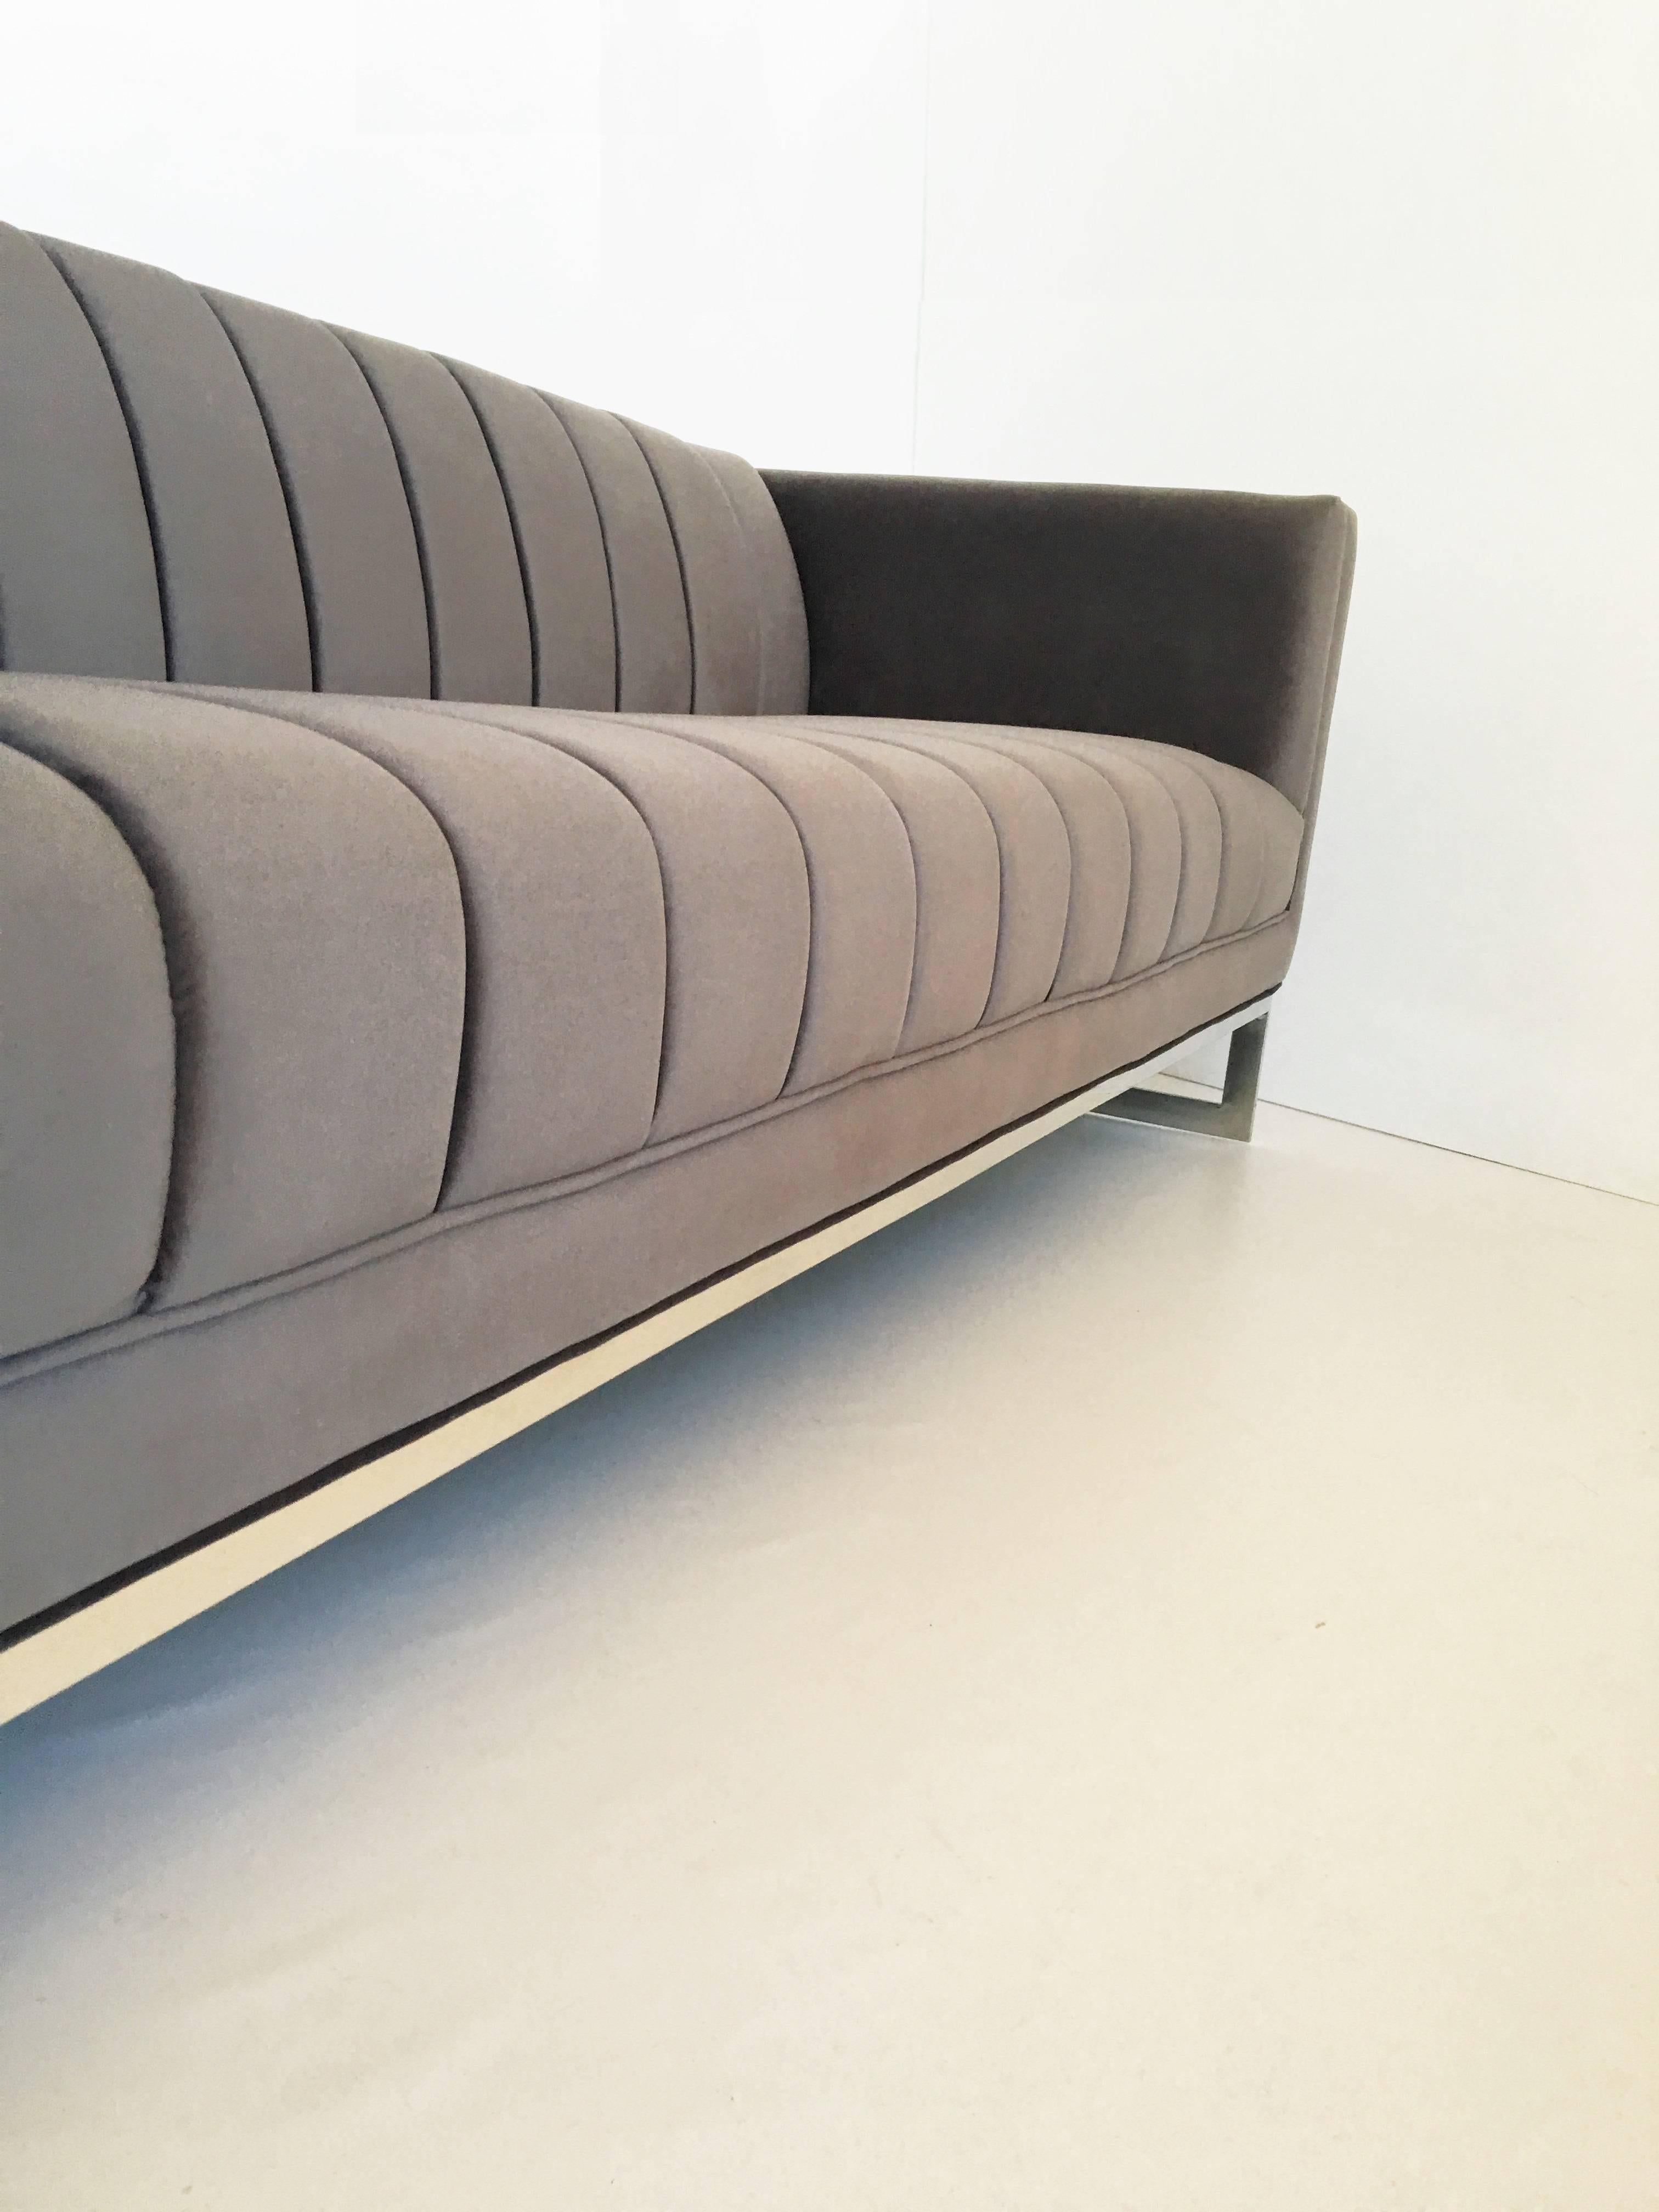 Mid-Century Modern Channel Design Floating Flat Bar Chrome Frame Sofa In Excellent Condition For Sale In Dallas, TX